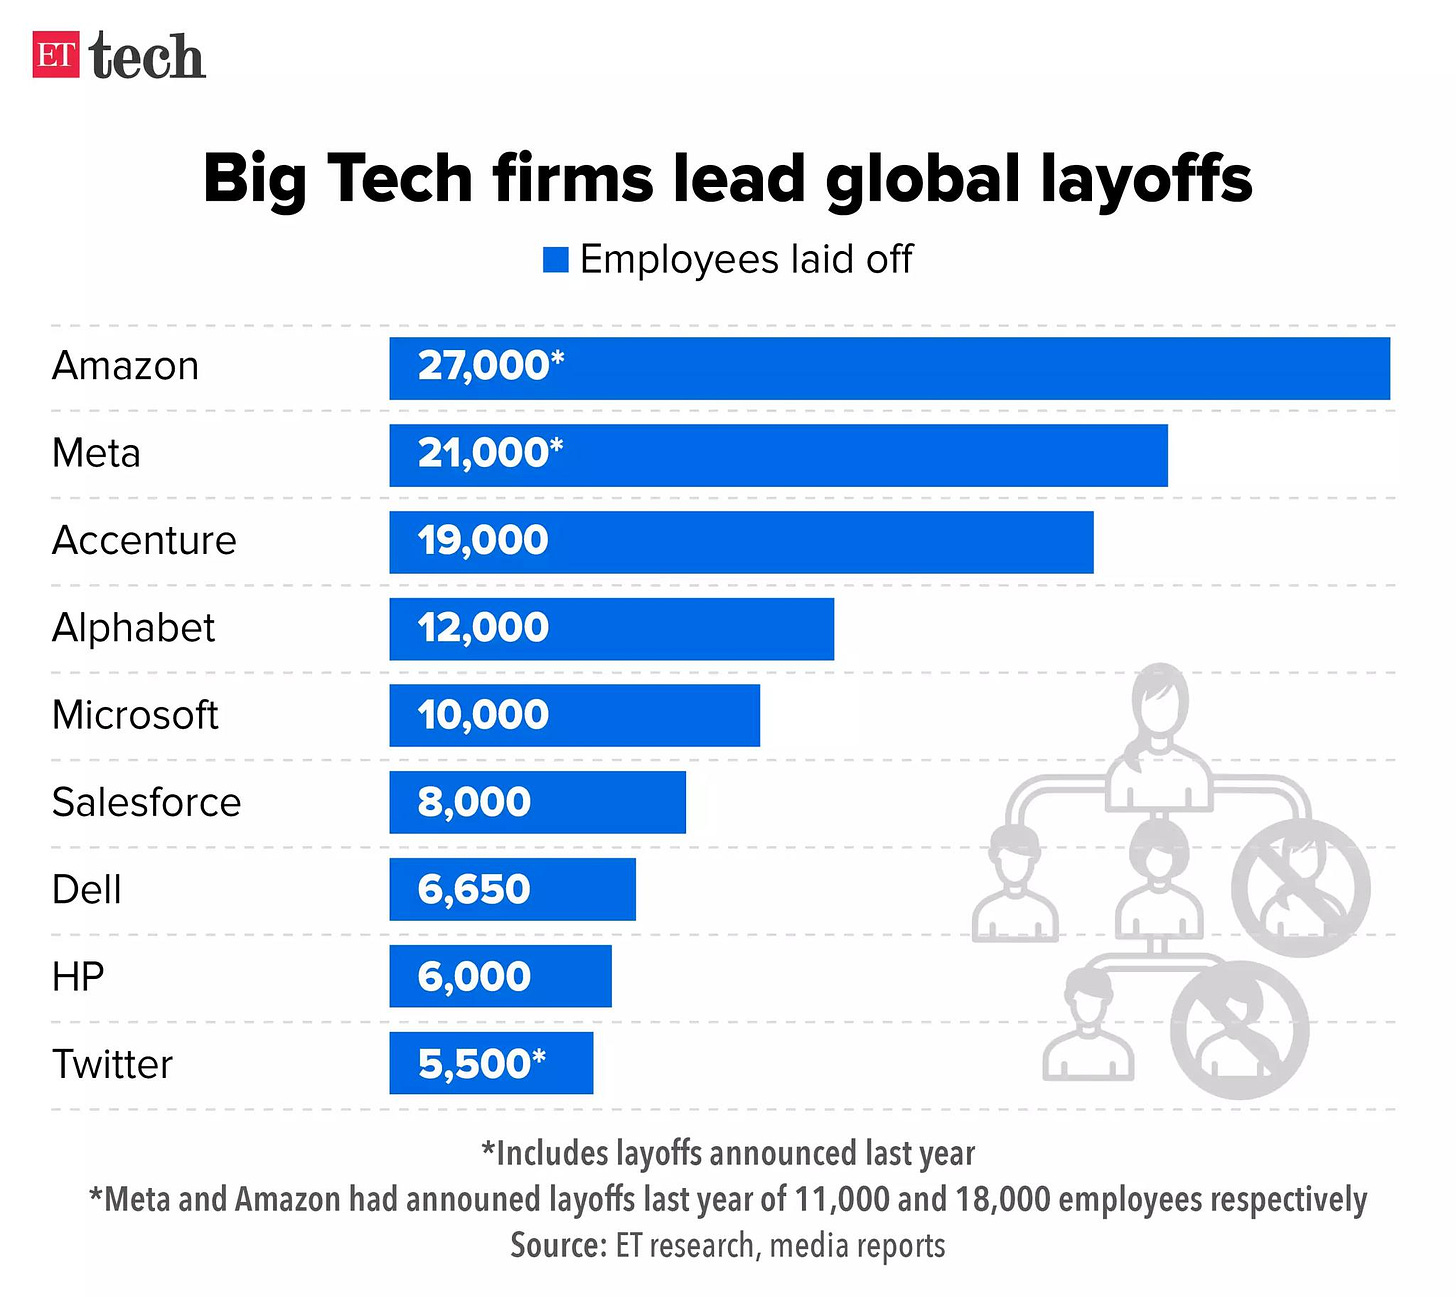 May be a graphic of text that says "ET tech Big Tech firms lead global layoffs Employees laid off Amazon 27,000* Meta 21,000* Accenture 19,000 Alphabet 12,000 Microsoft 10,000 Salesforce 8,000 Dell HP 6,650 6,000 Twitter 5,500* *Includes layoffs announced last year *Meta and Amazon had announed layoffs last year of 1,000 and 18,000 employees respectively Source: ET esearch, media reports"